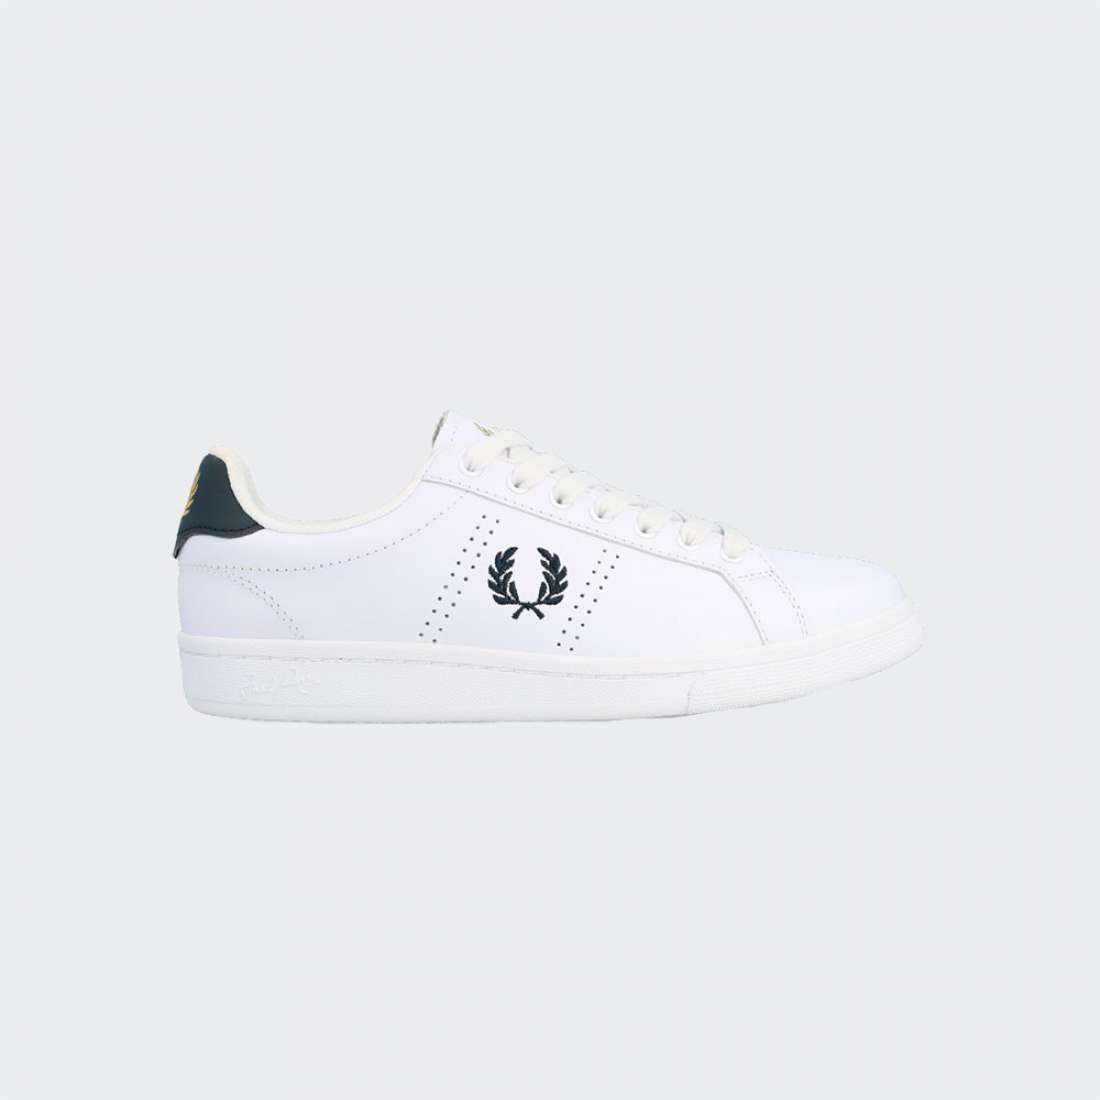 FRED PERRY B721 567